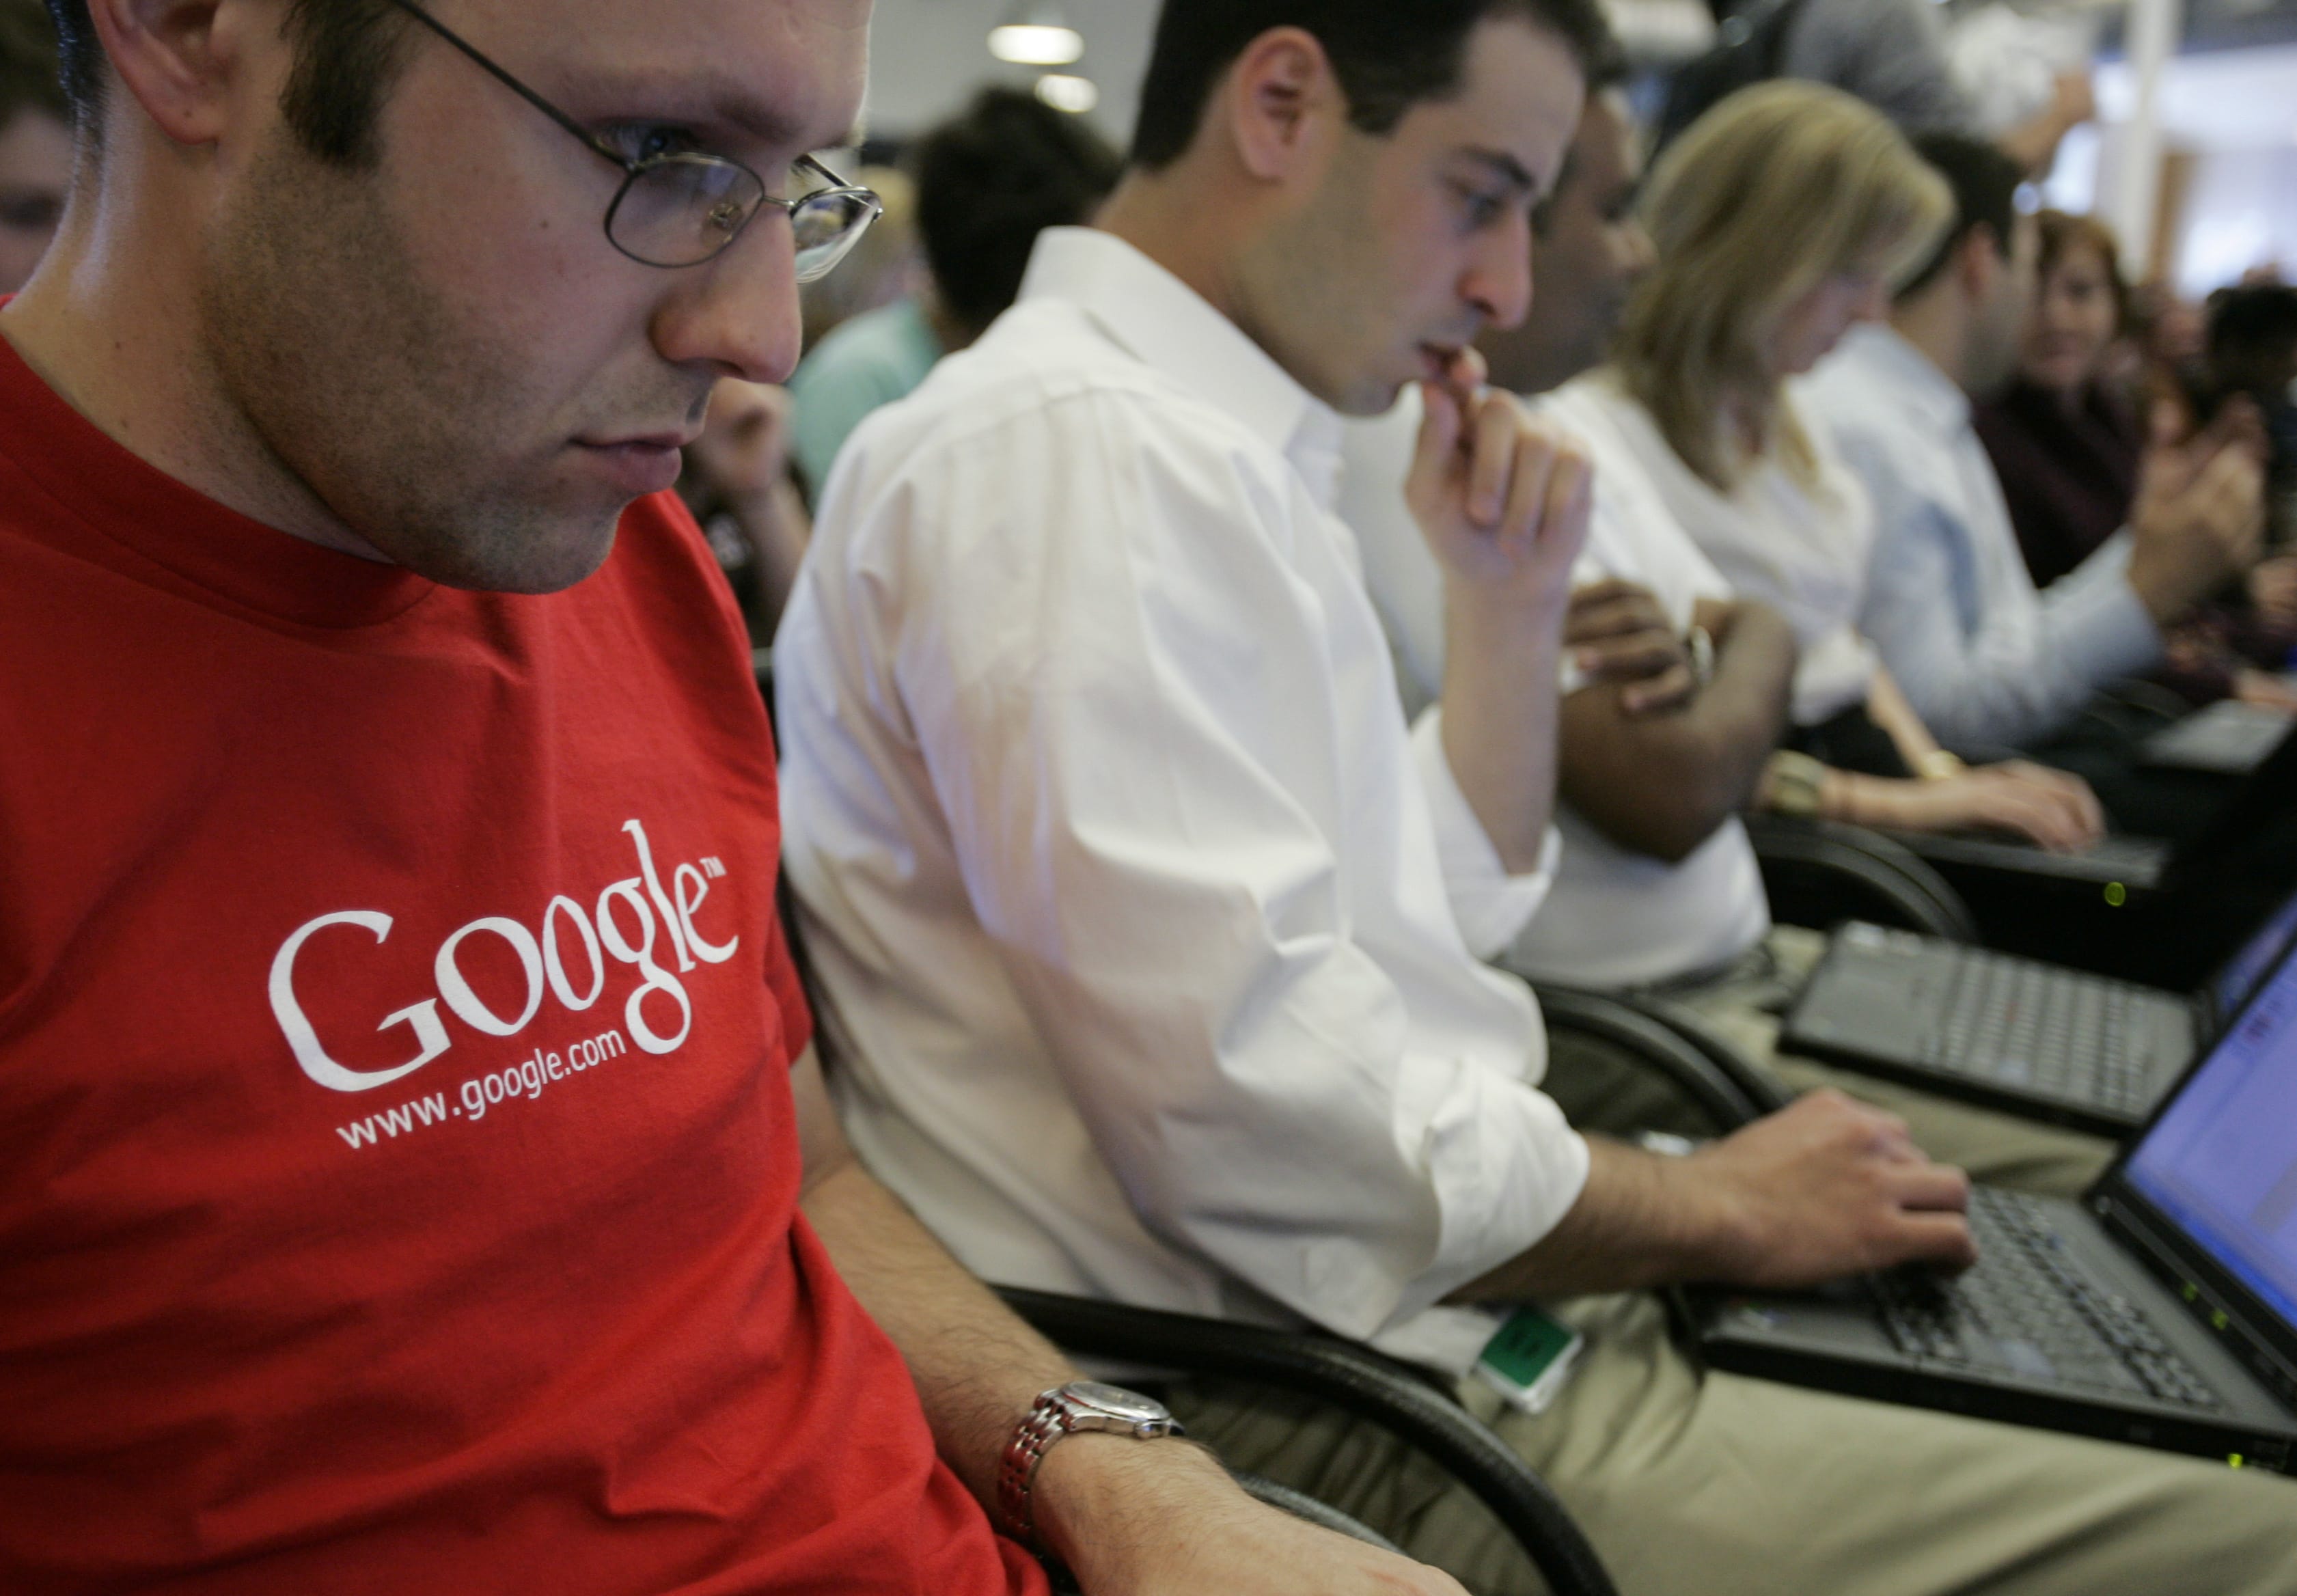 Google employees work on their laptops at Google headquarters in Mountain View, Calif., in 2007.